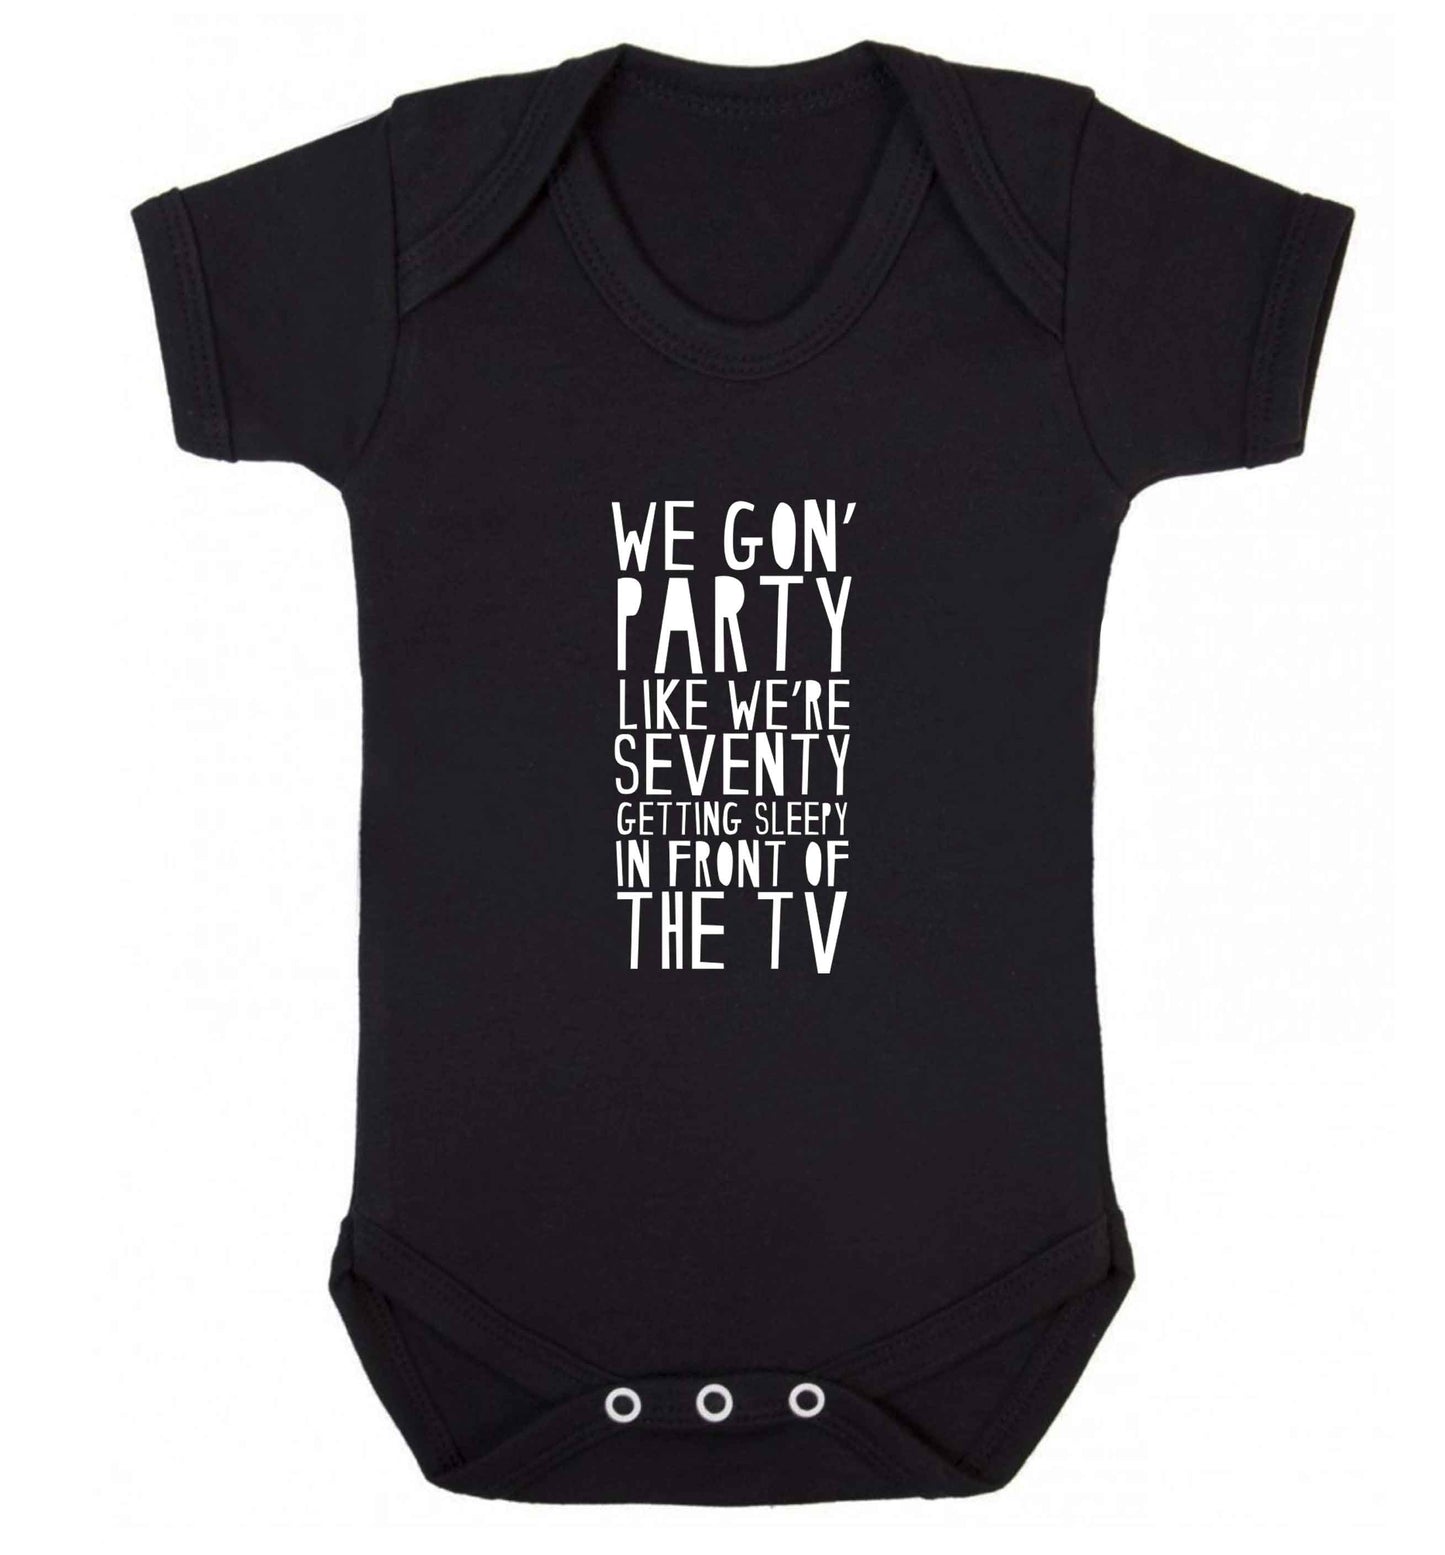 We gon' party like we're seventy getting sleepy in front of the TV baby vest black 18-24 months